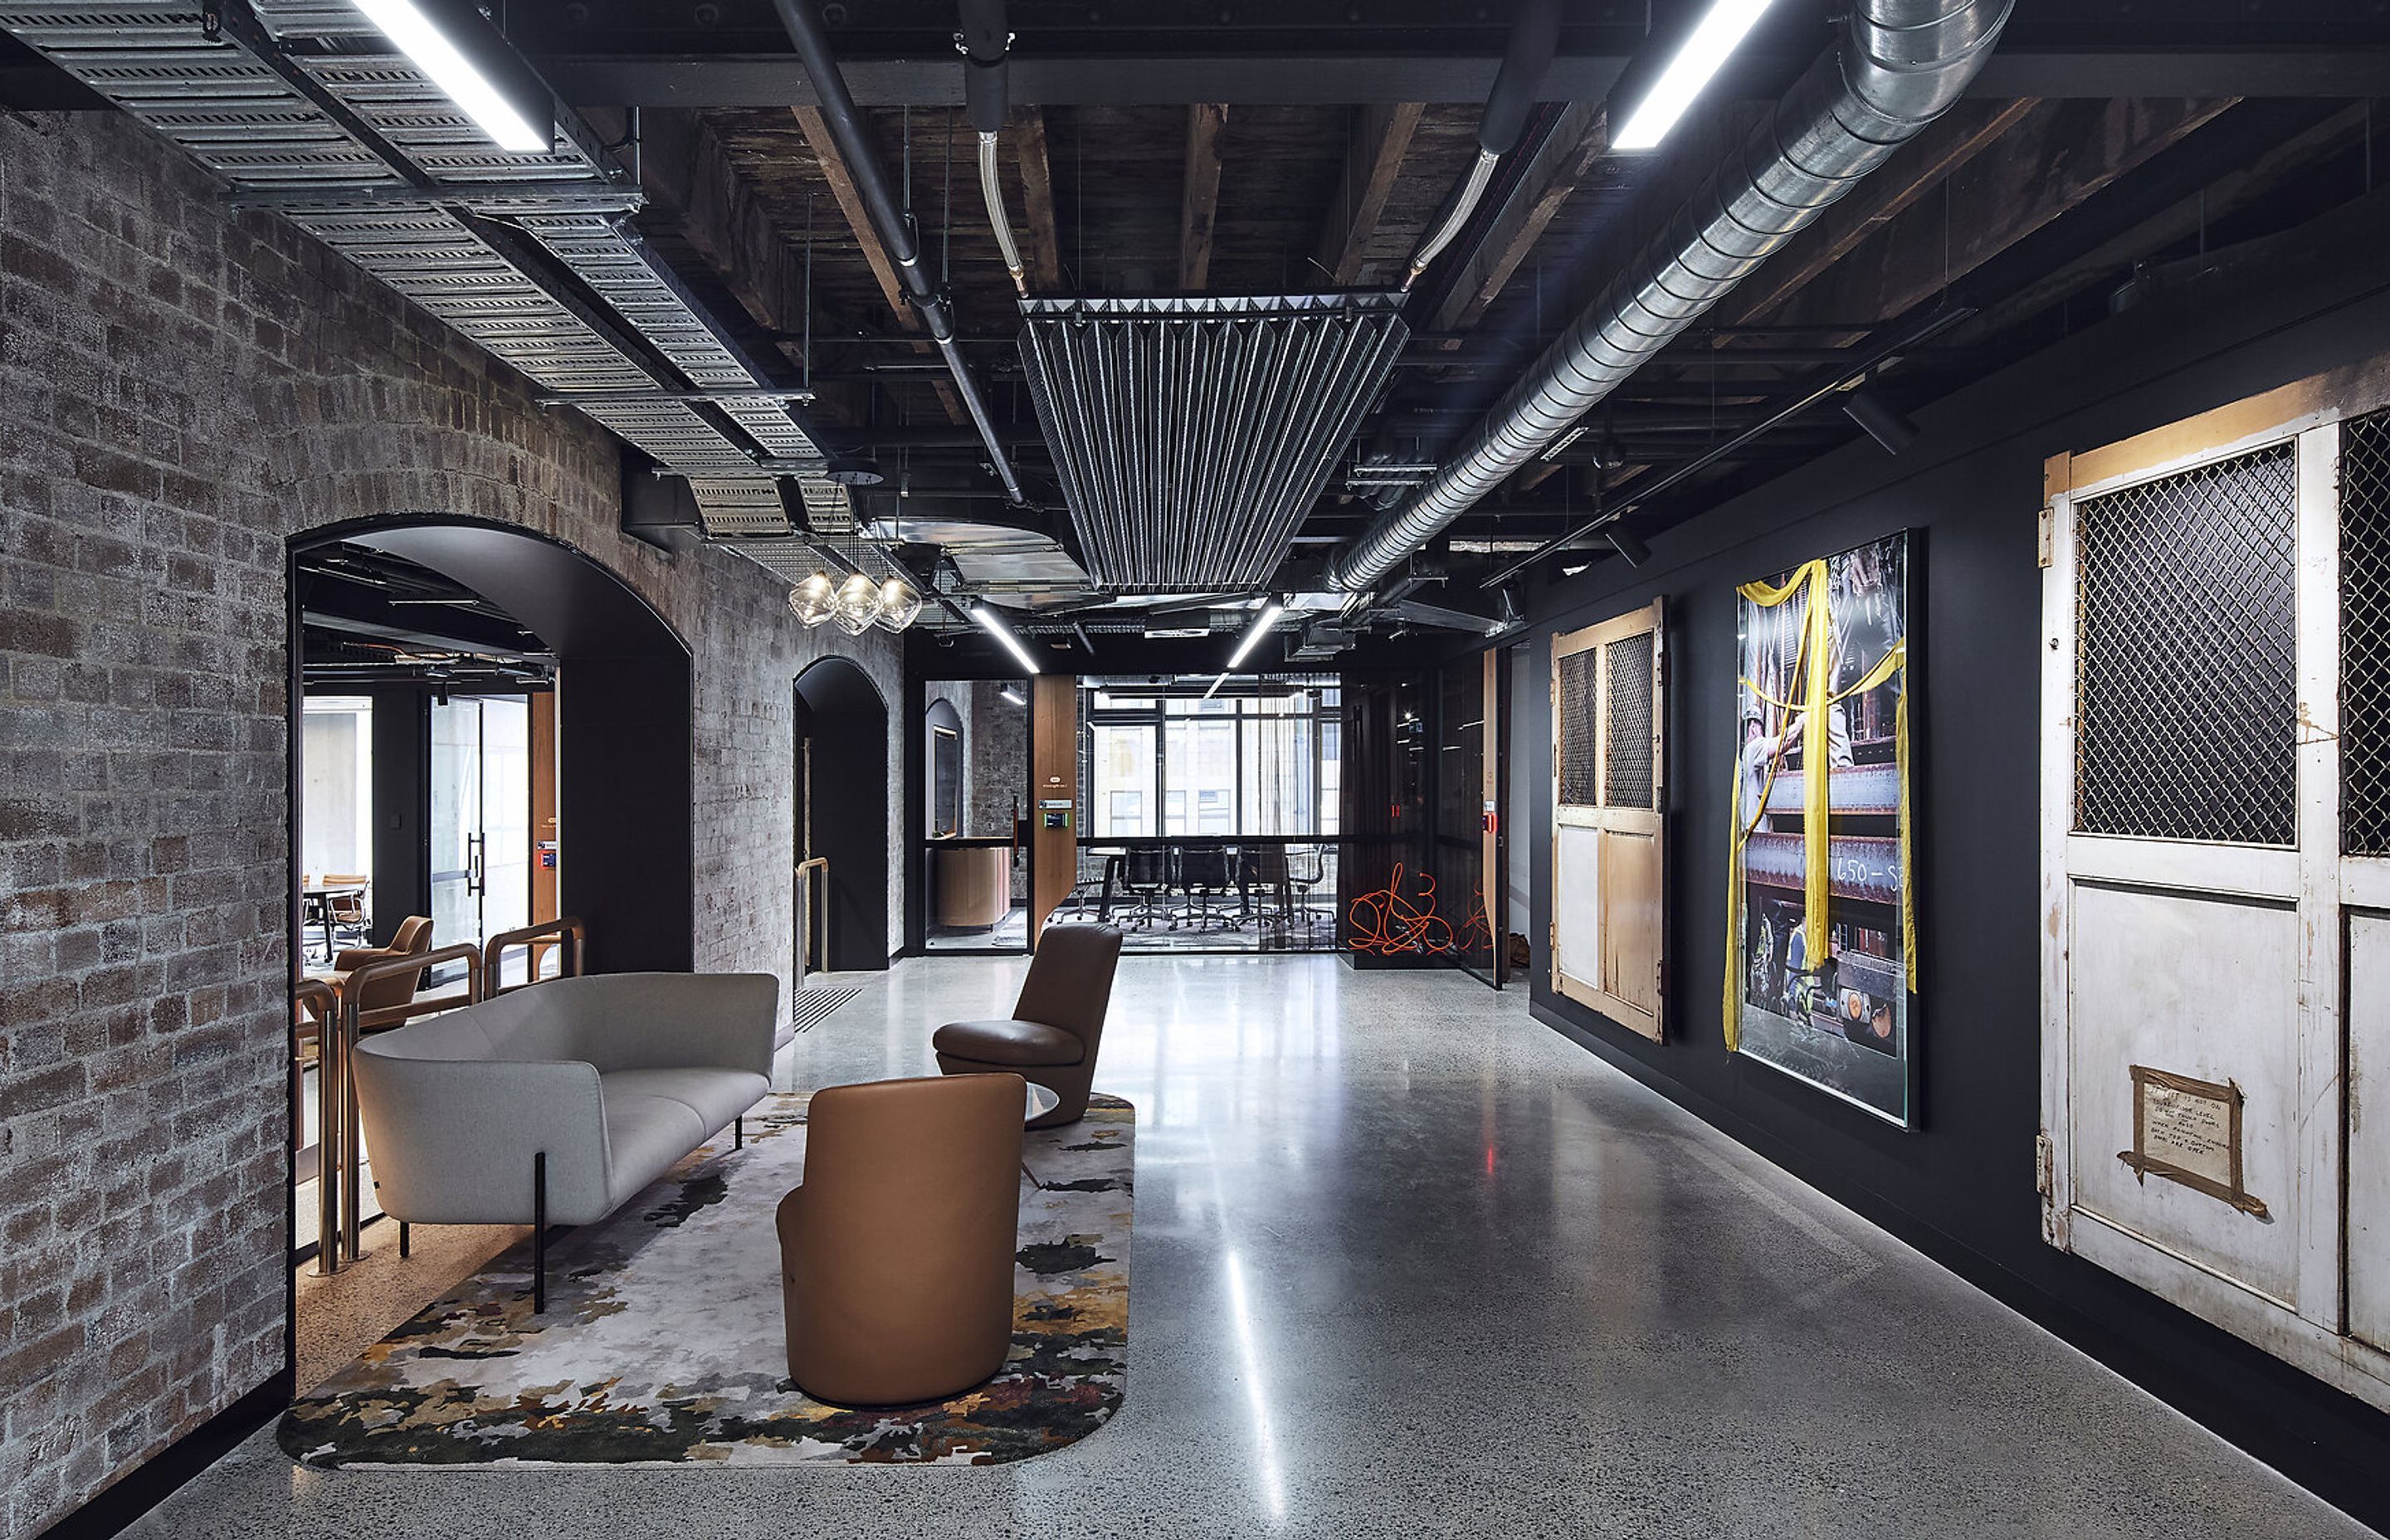 Built Head Office by Fjmt Studio | Photography by Toby Peet